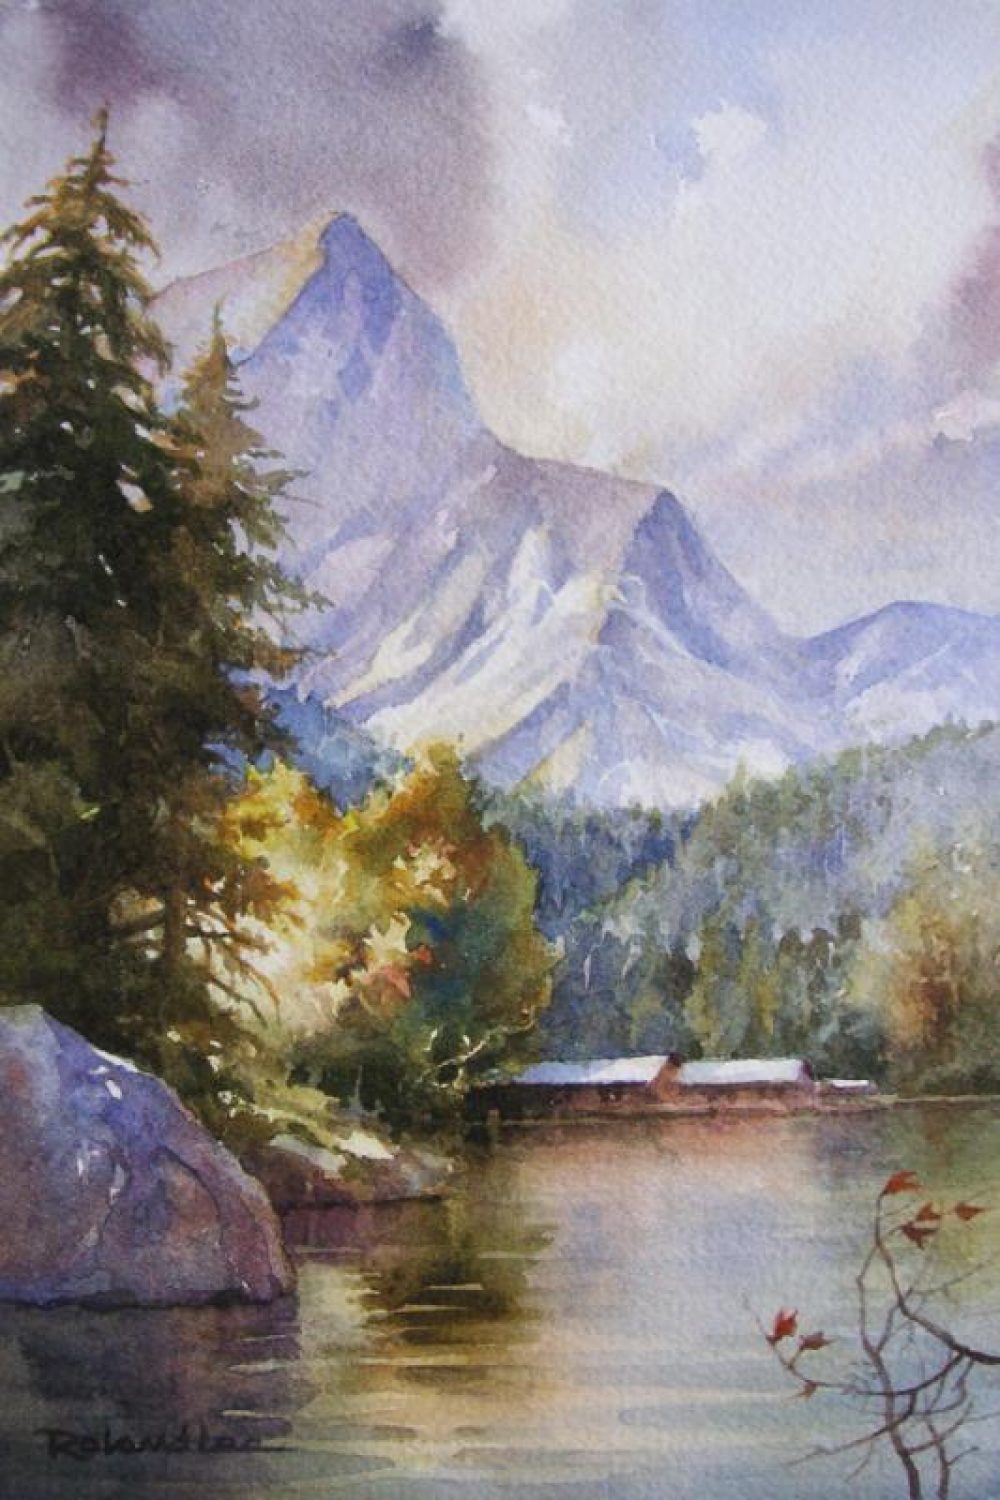 Lake in the Alps - Watercolor Painting of a Lake in the Alps